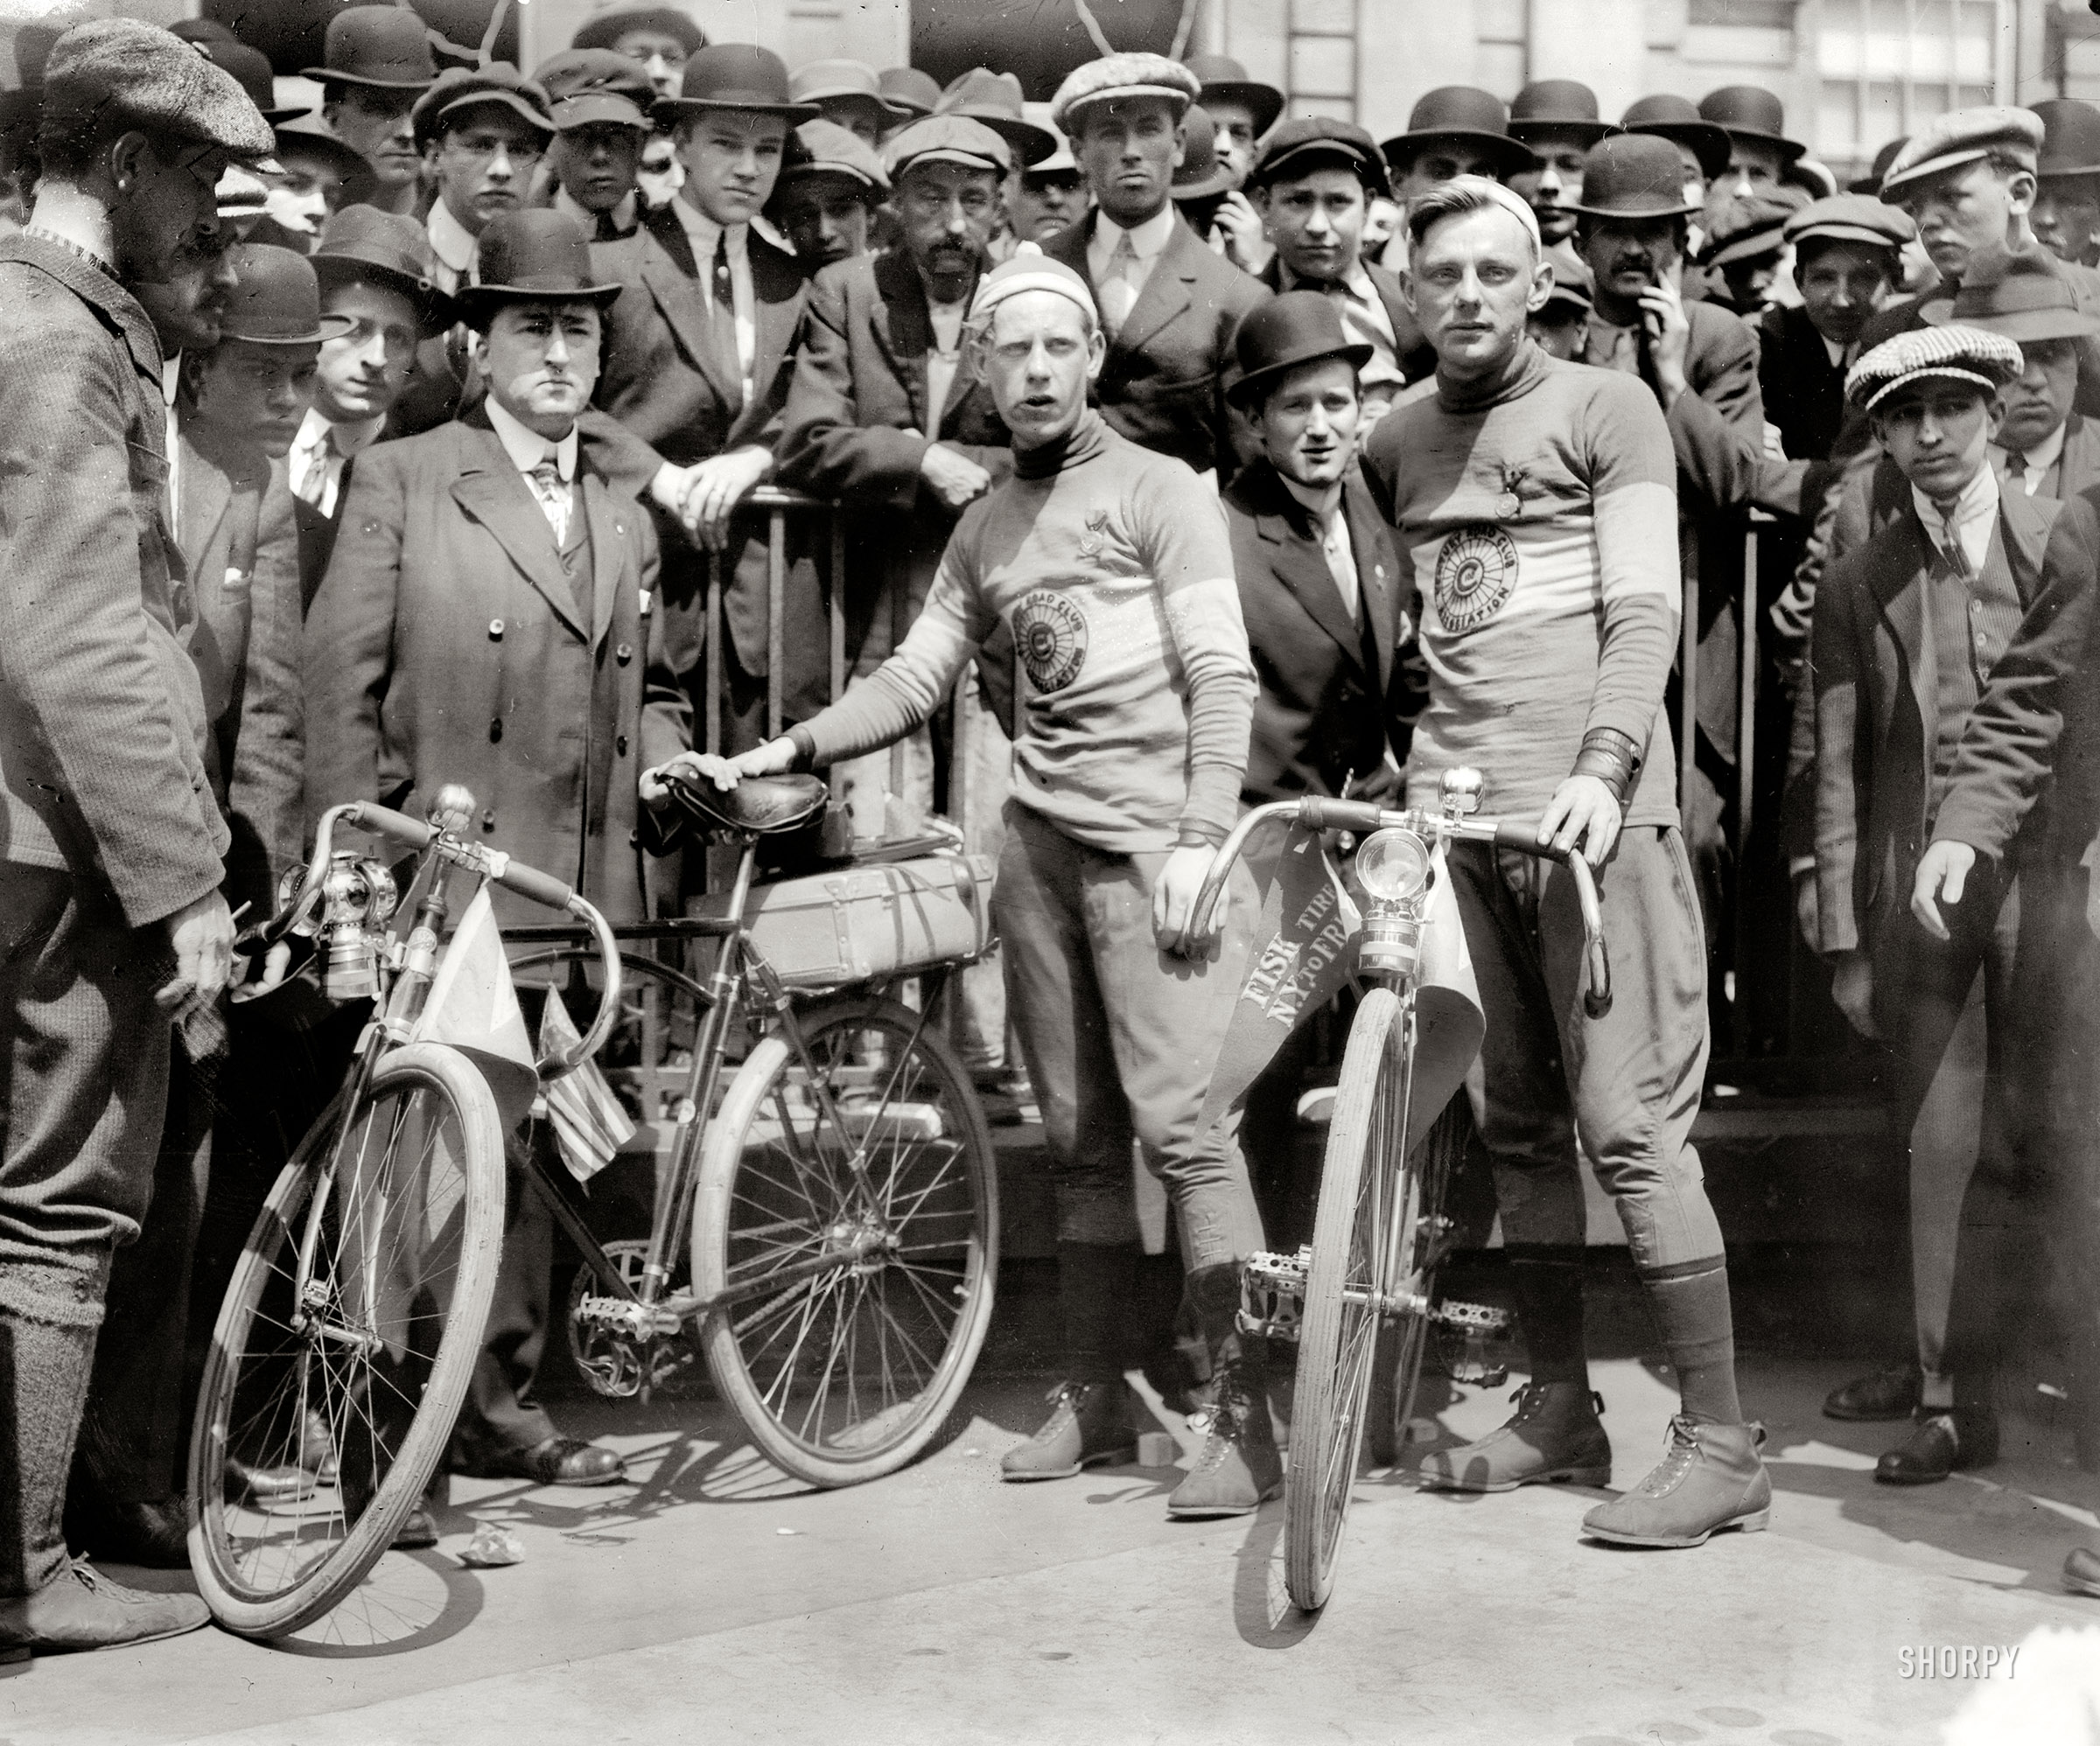 May 3, 1913. "Fred J. Scherer and Walter Wiley at the start of New York to San Francisco bicycle race." Bain News Service glass negative. View full size.